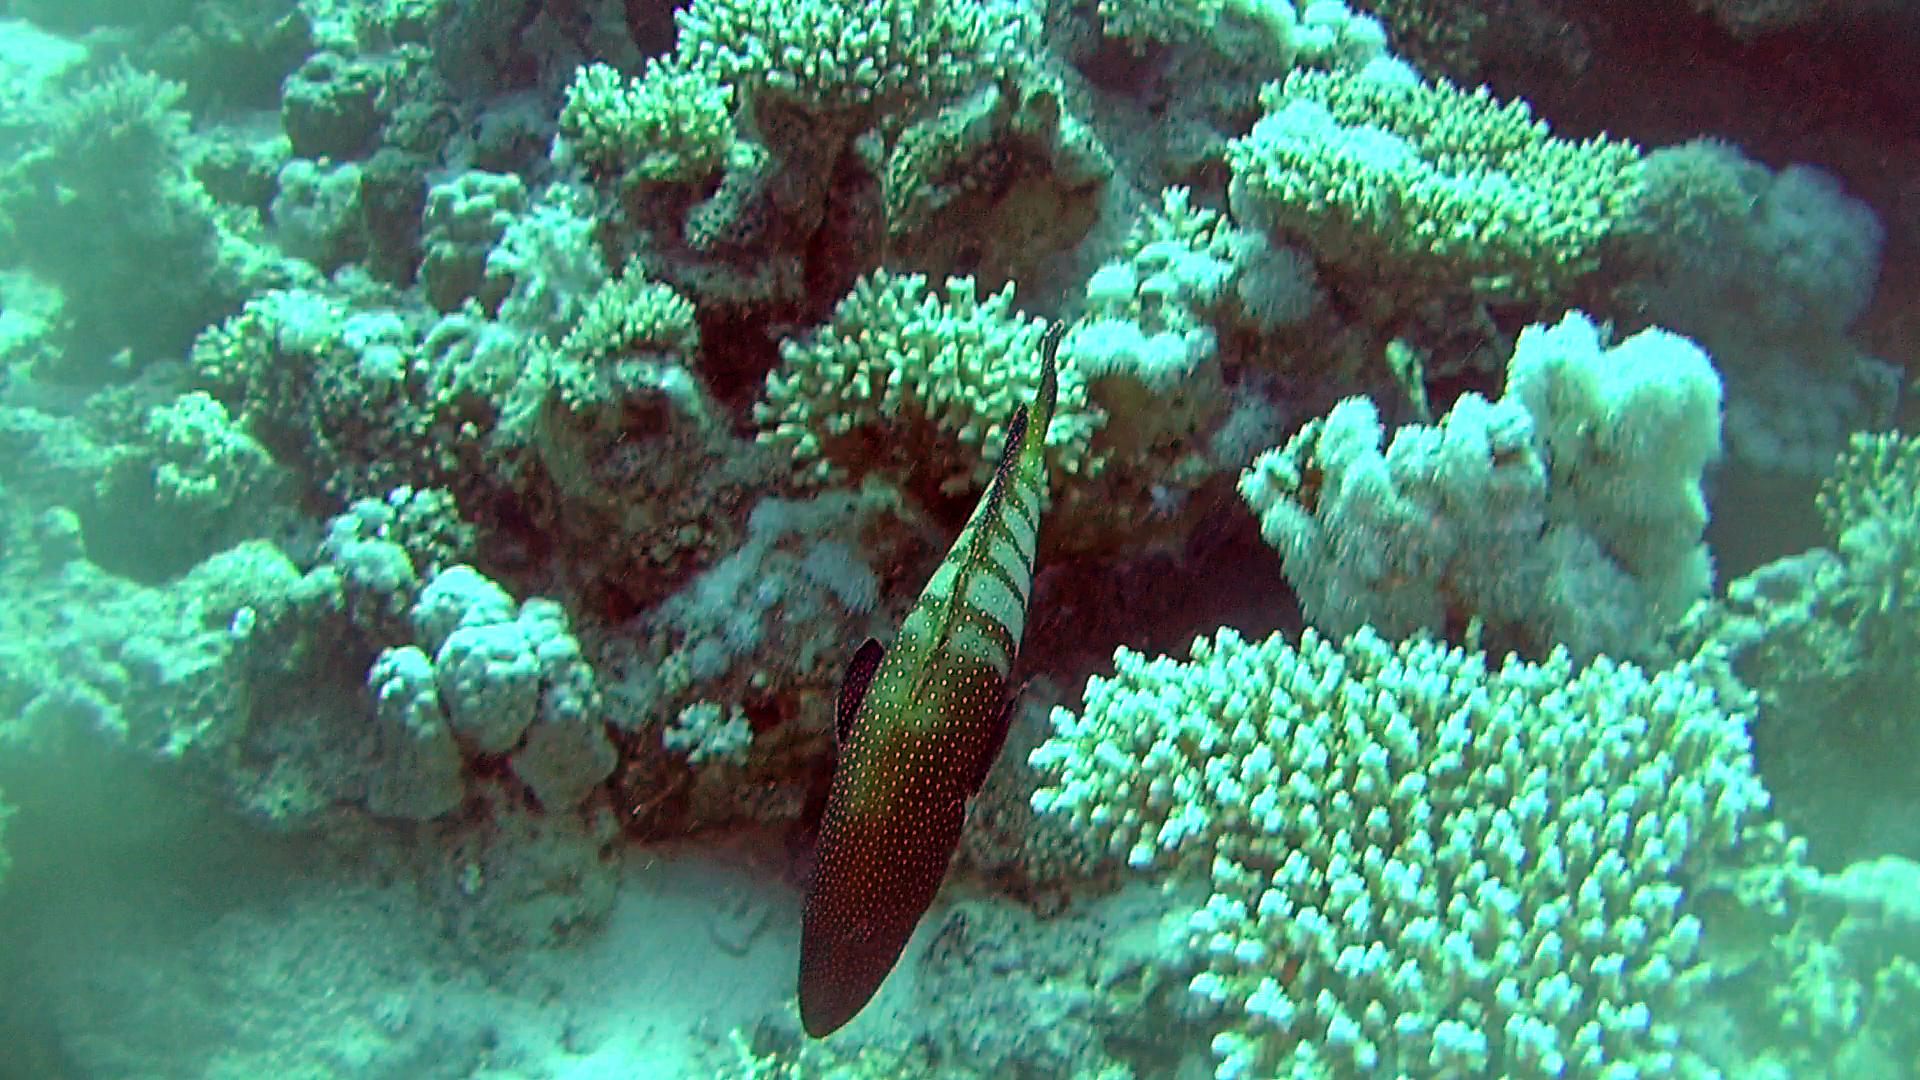 The Bluespotted Grouper